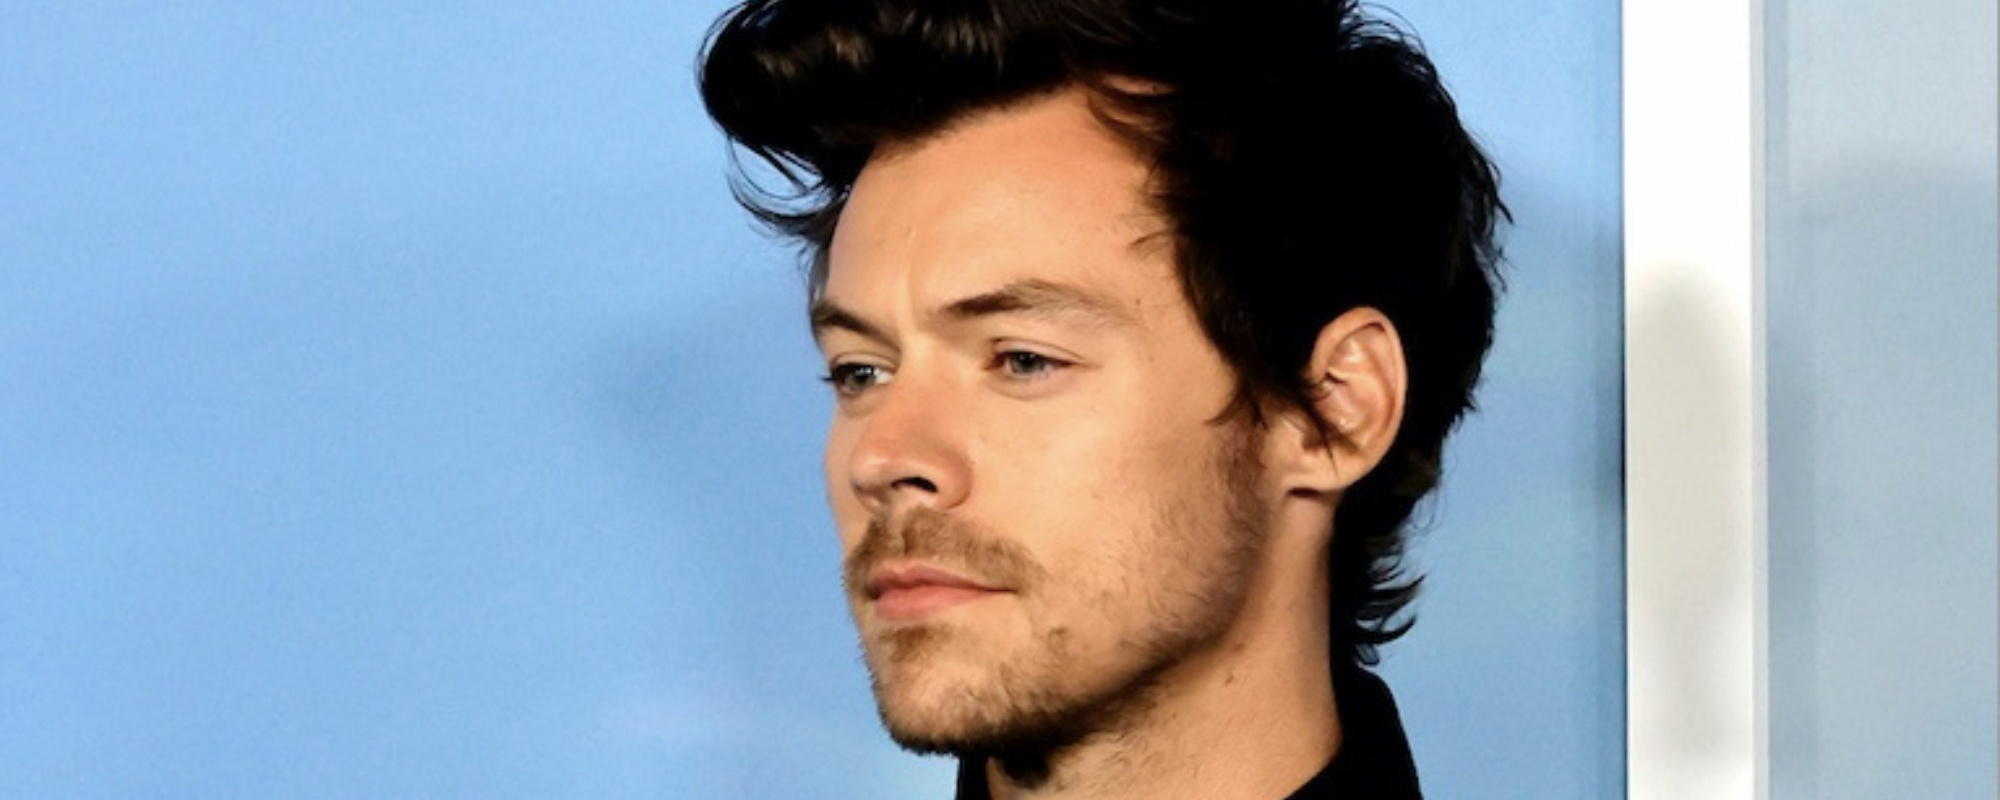 6 Times Harry Styles Songs Made Us Cry